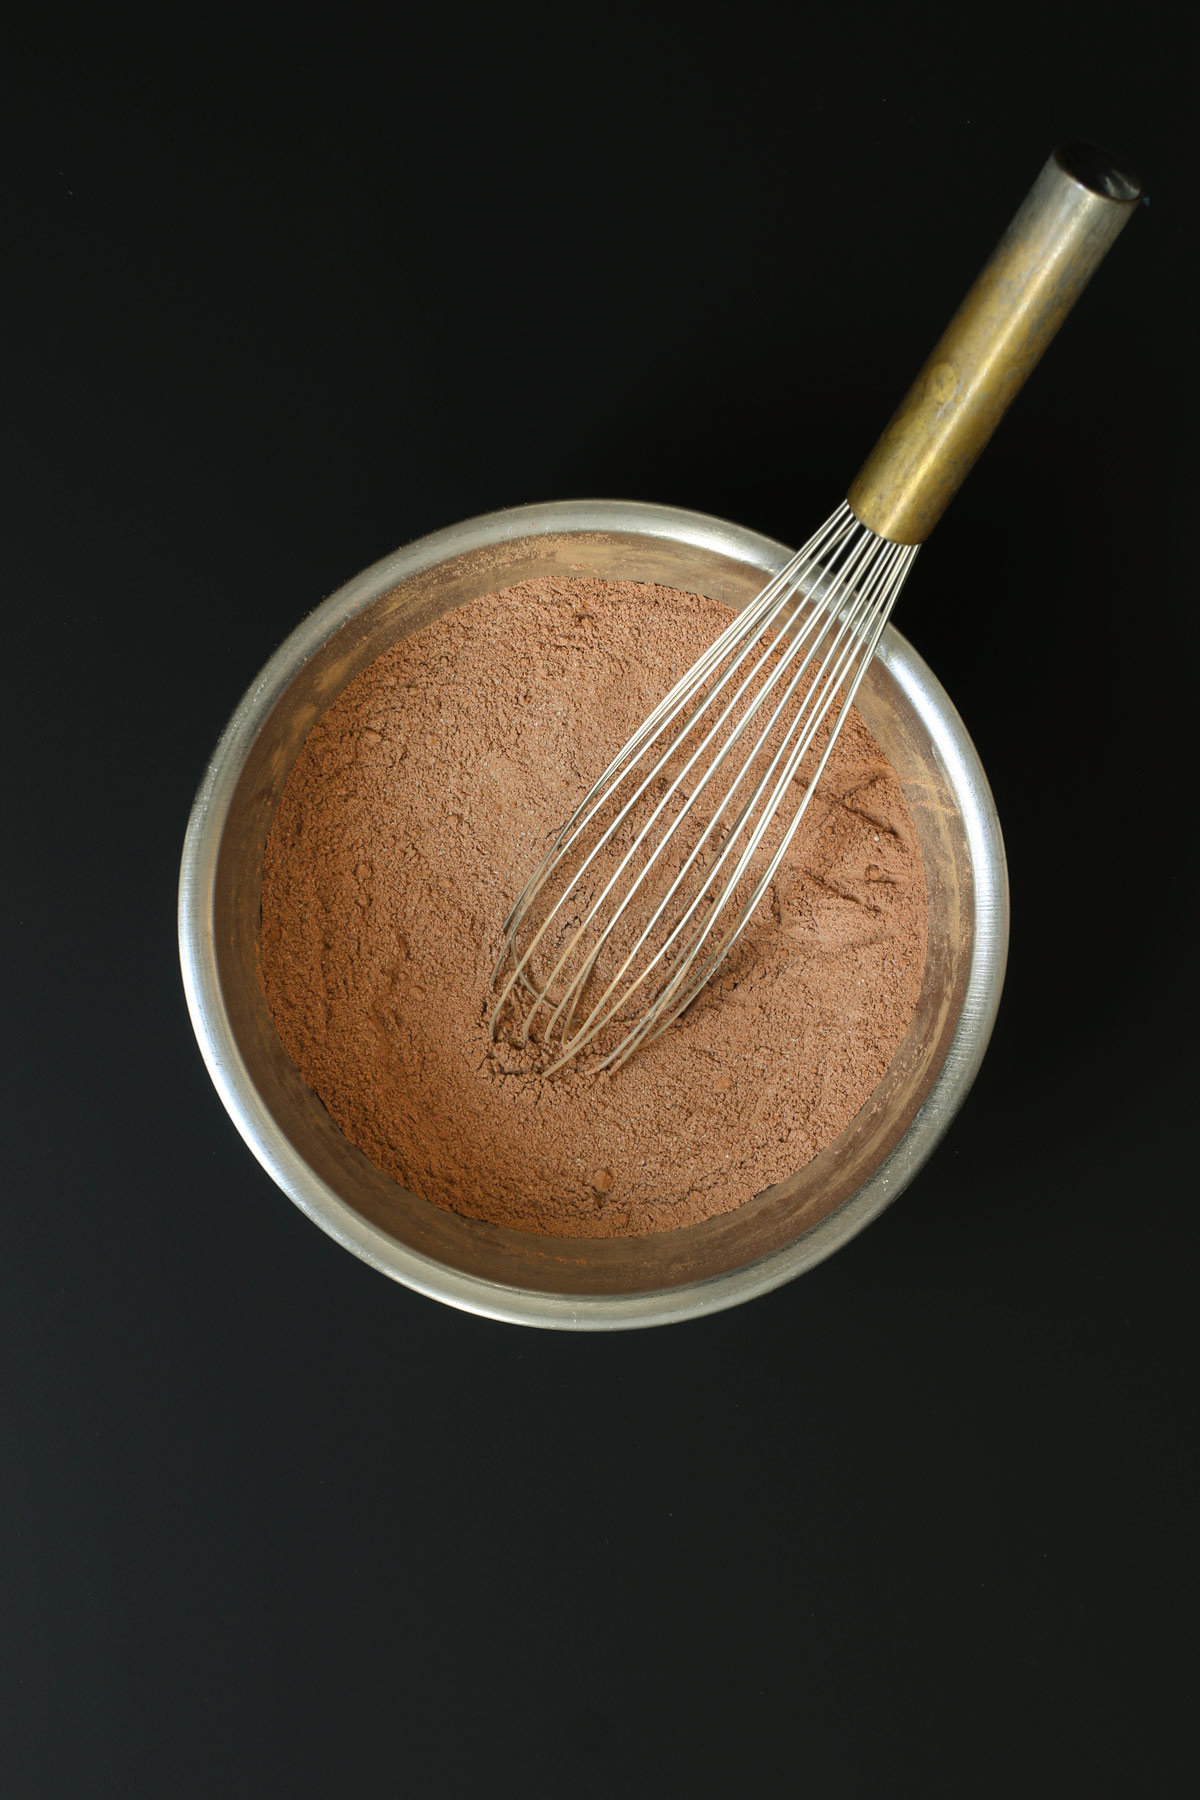 brownie ingredients whisked together in a steel mixing bowl.